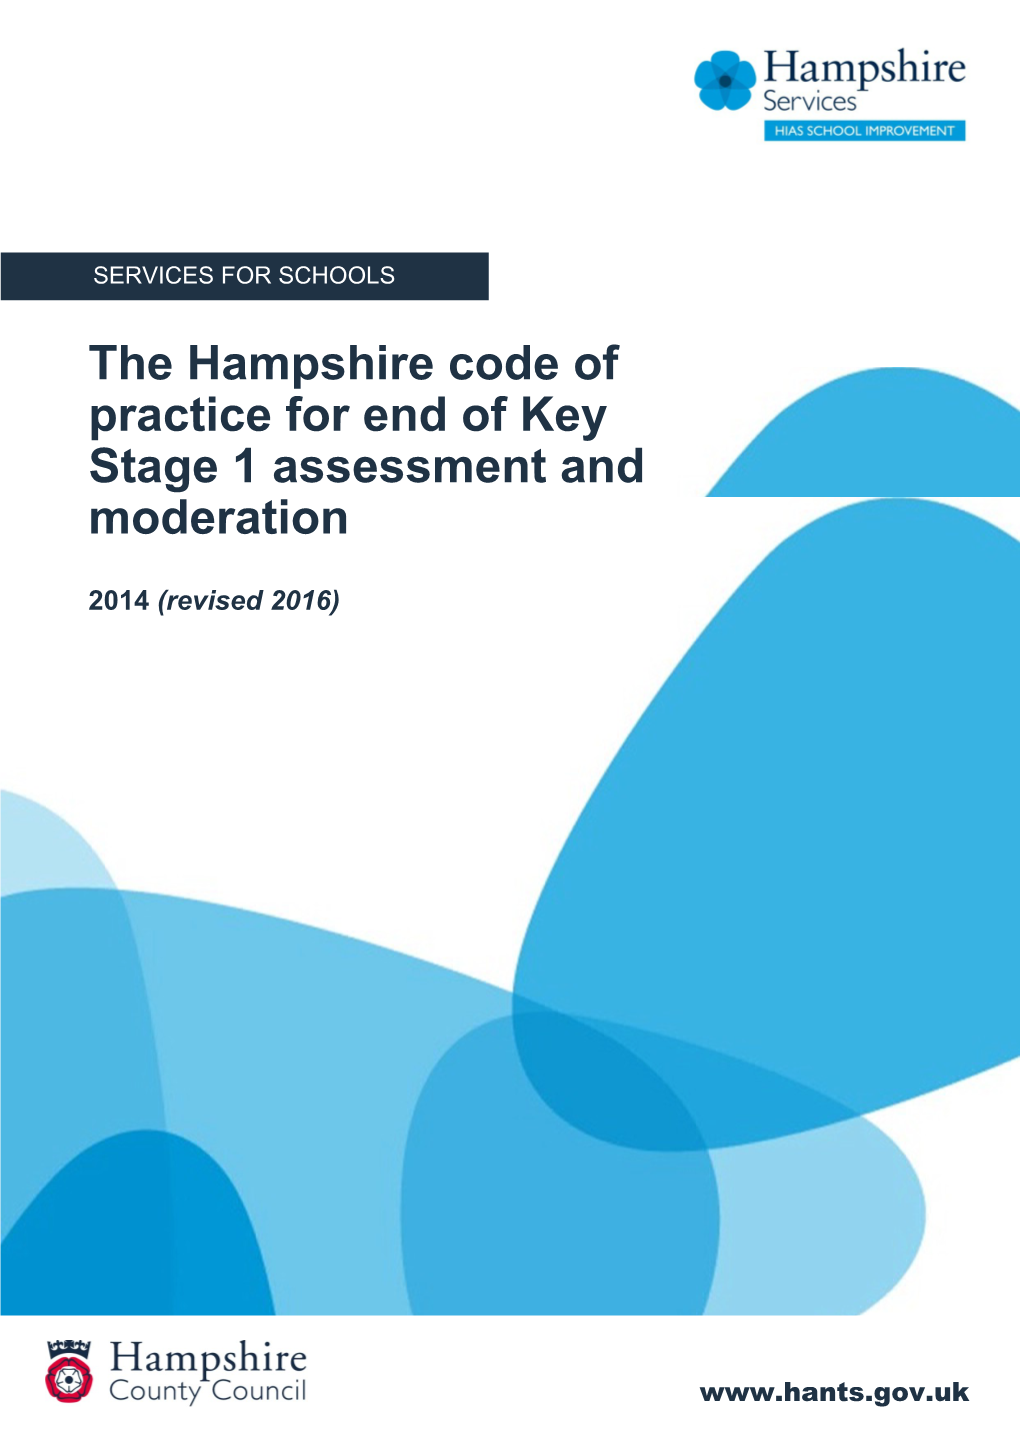 The Hampshire Code of Practice for End of Key Stage 1 Assessment and Moderation